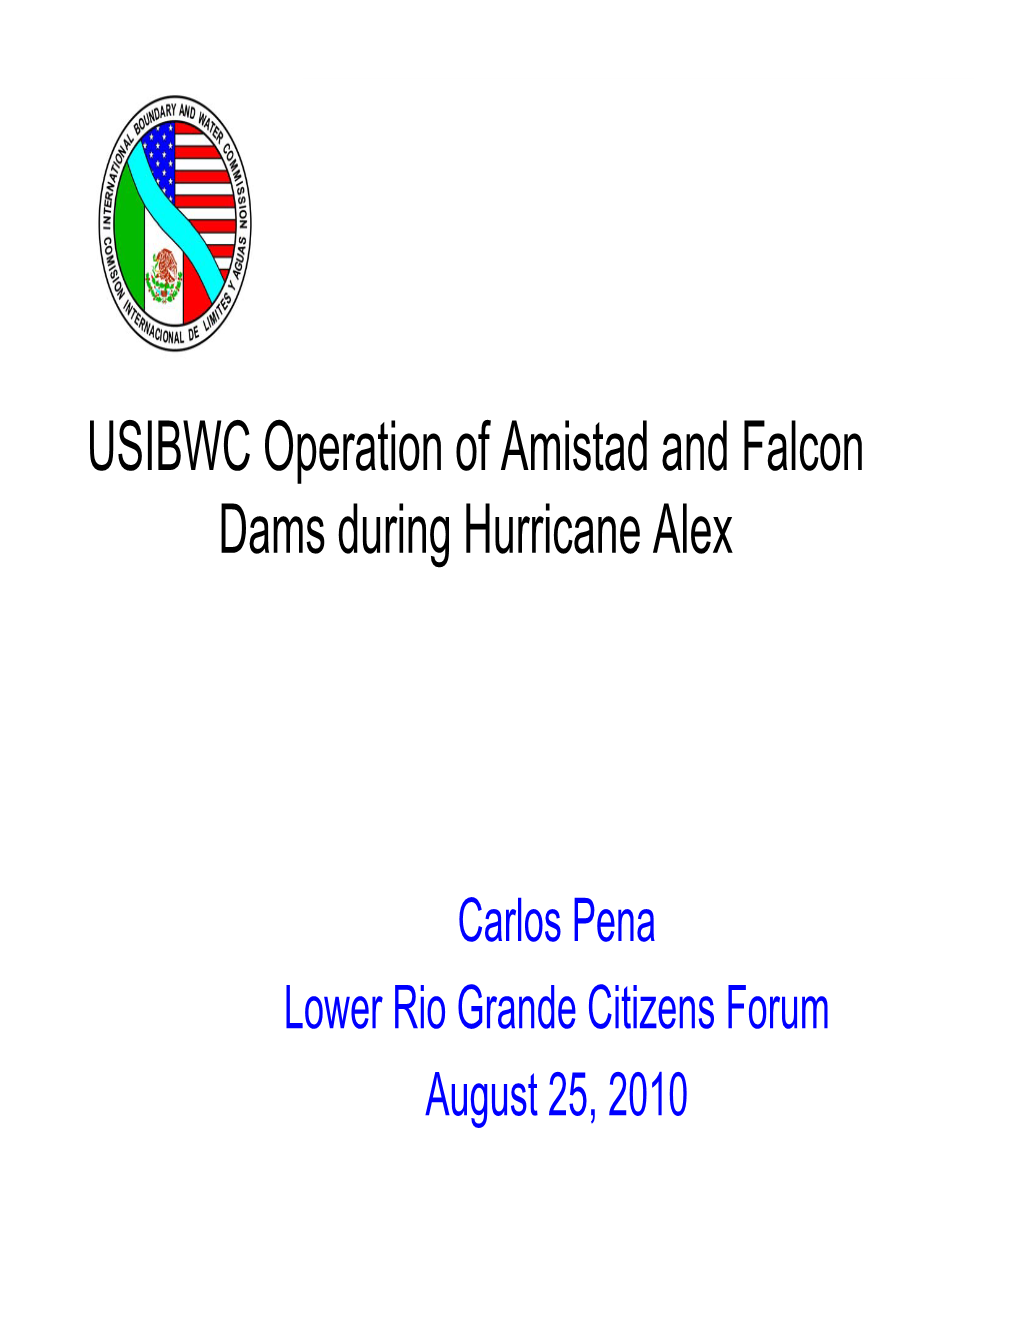 USIBWC Operation of Amistad and Falcon Dams During Hurricane Alex